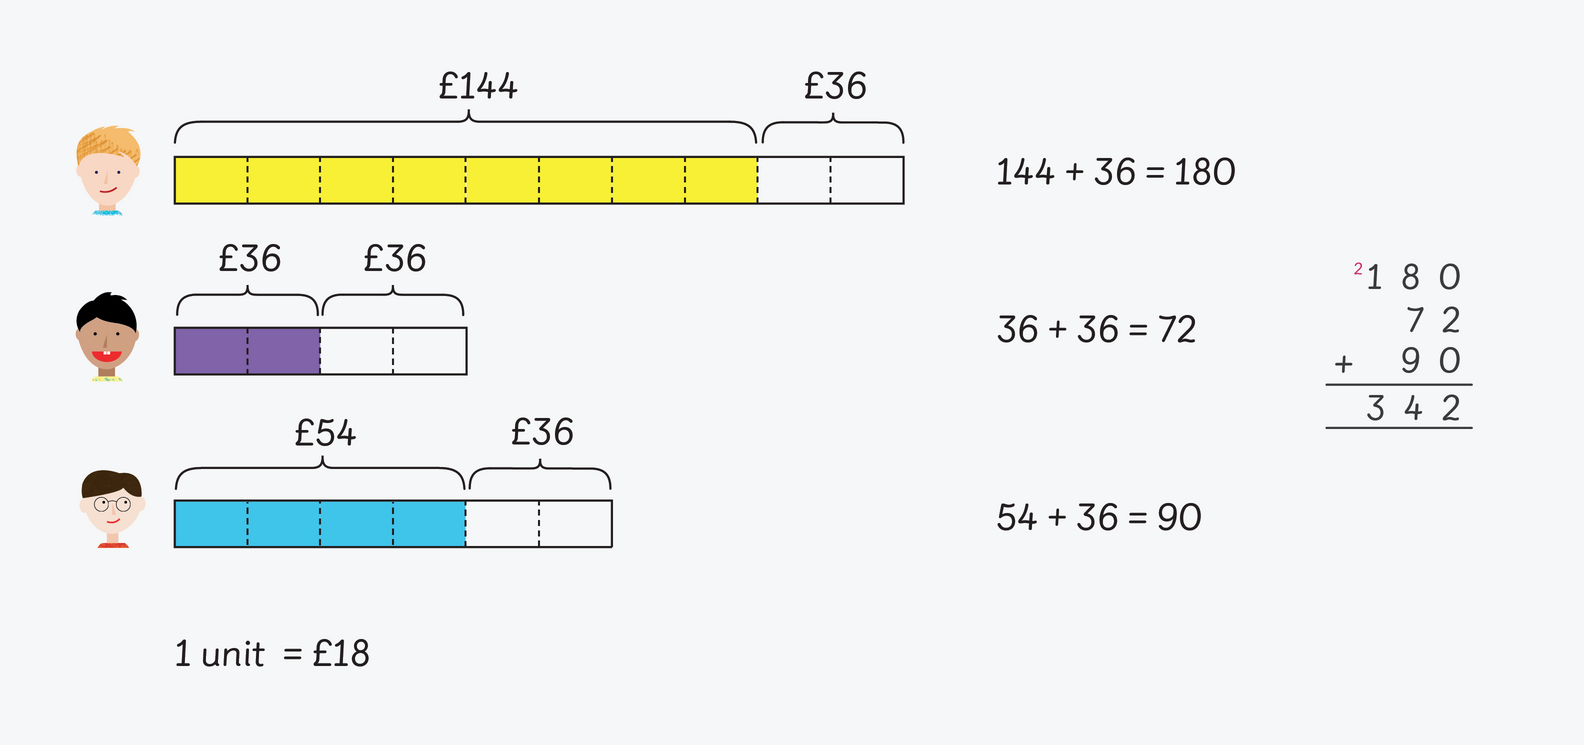 bar models for each addition equation from the Maths — No Problem! textbook 